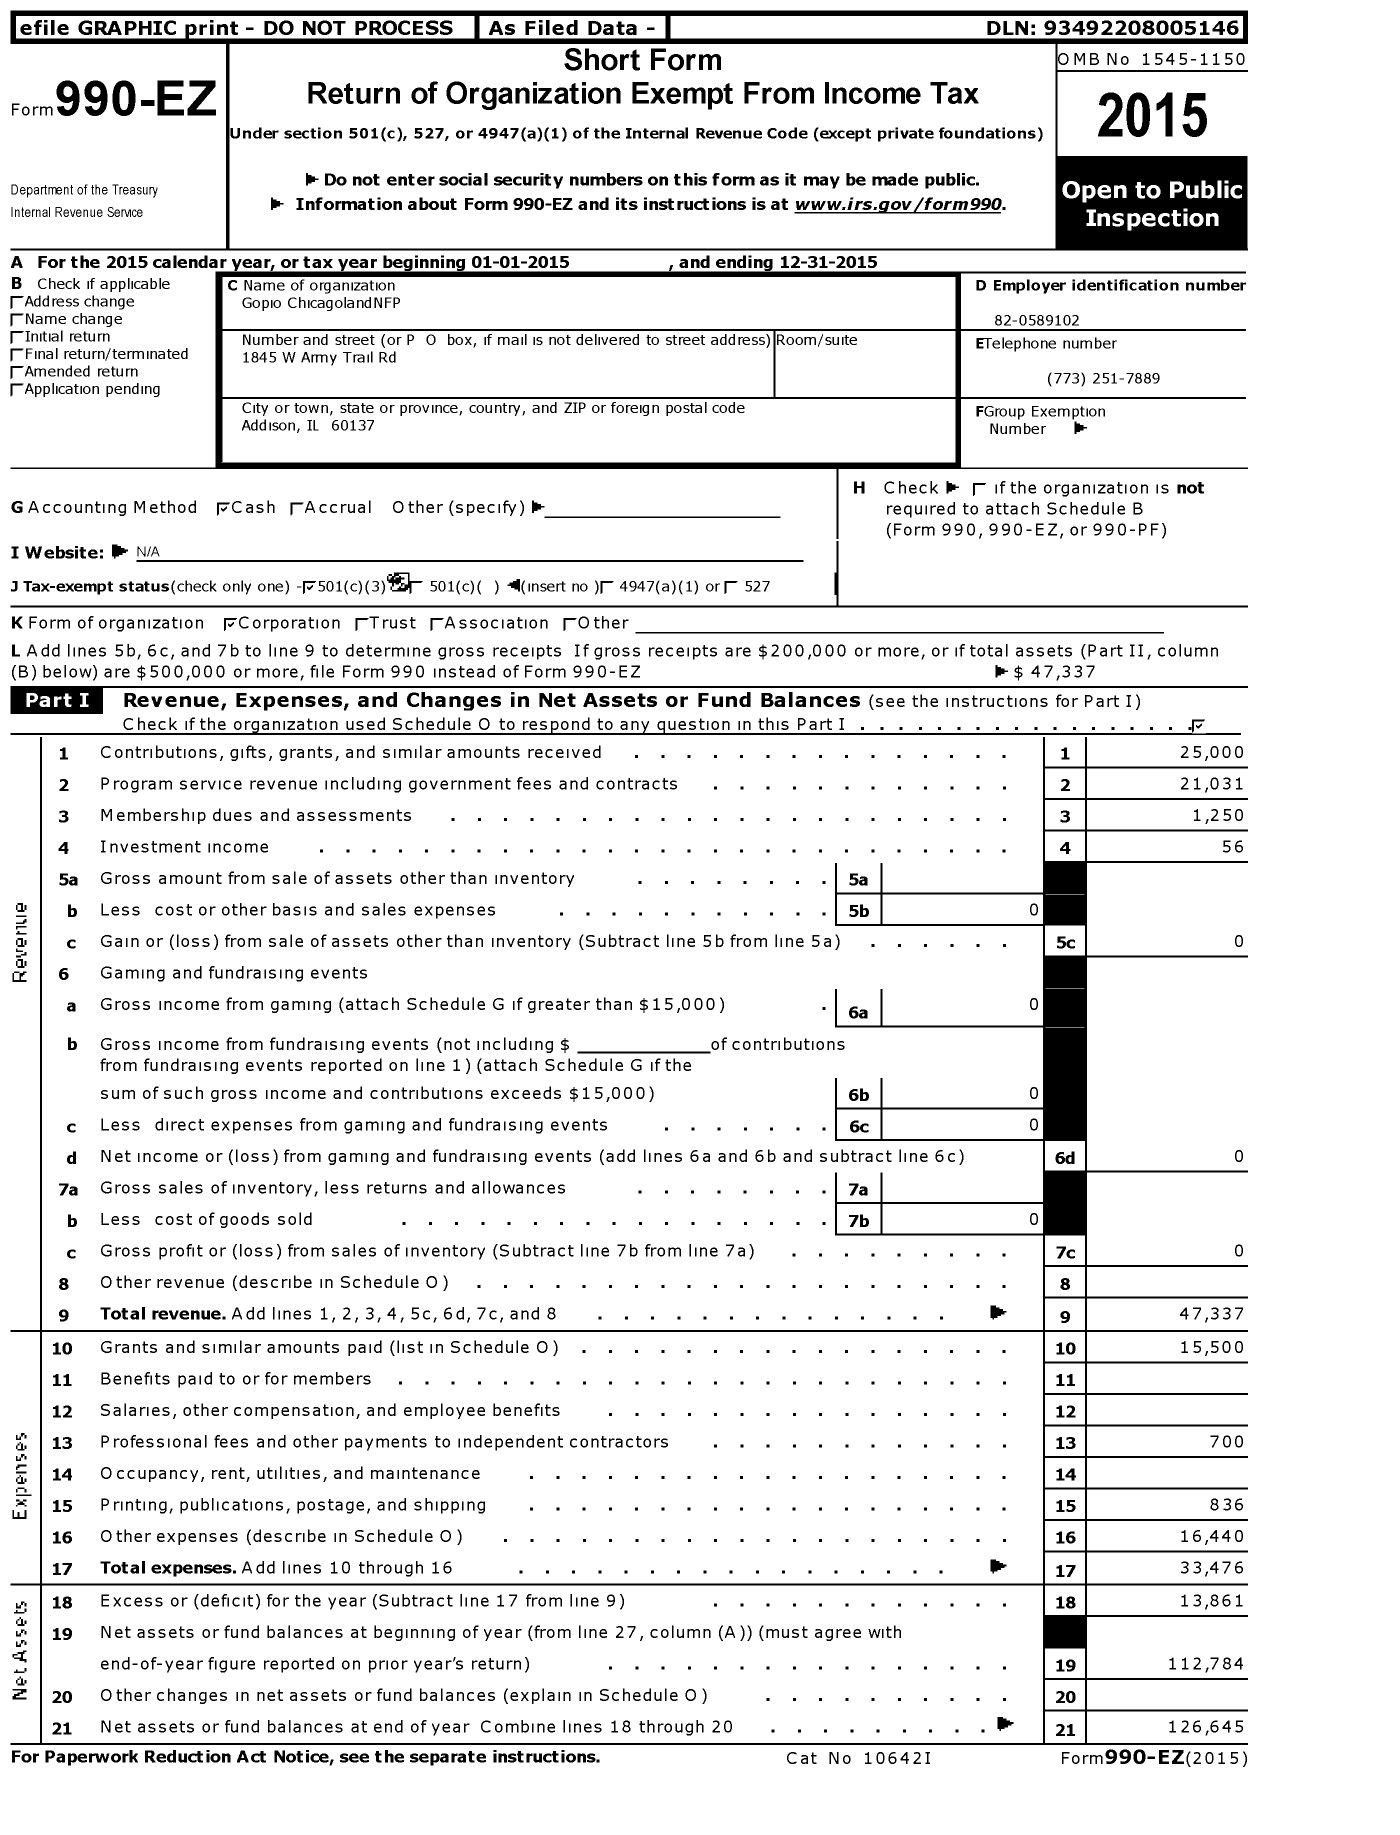 Image of first page of 2015 Form 990EZ for Gopio ChicagolandNFP